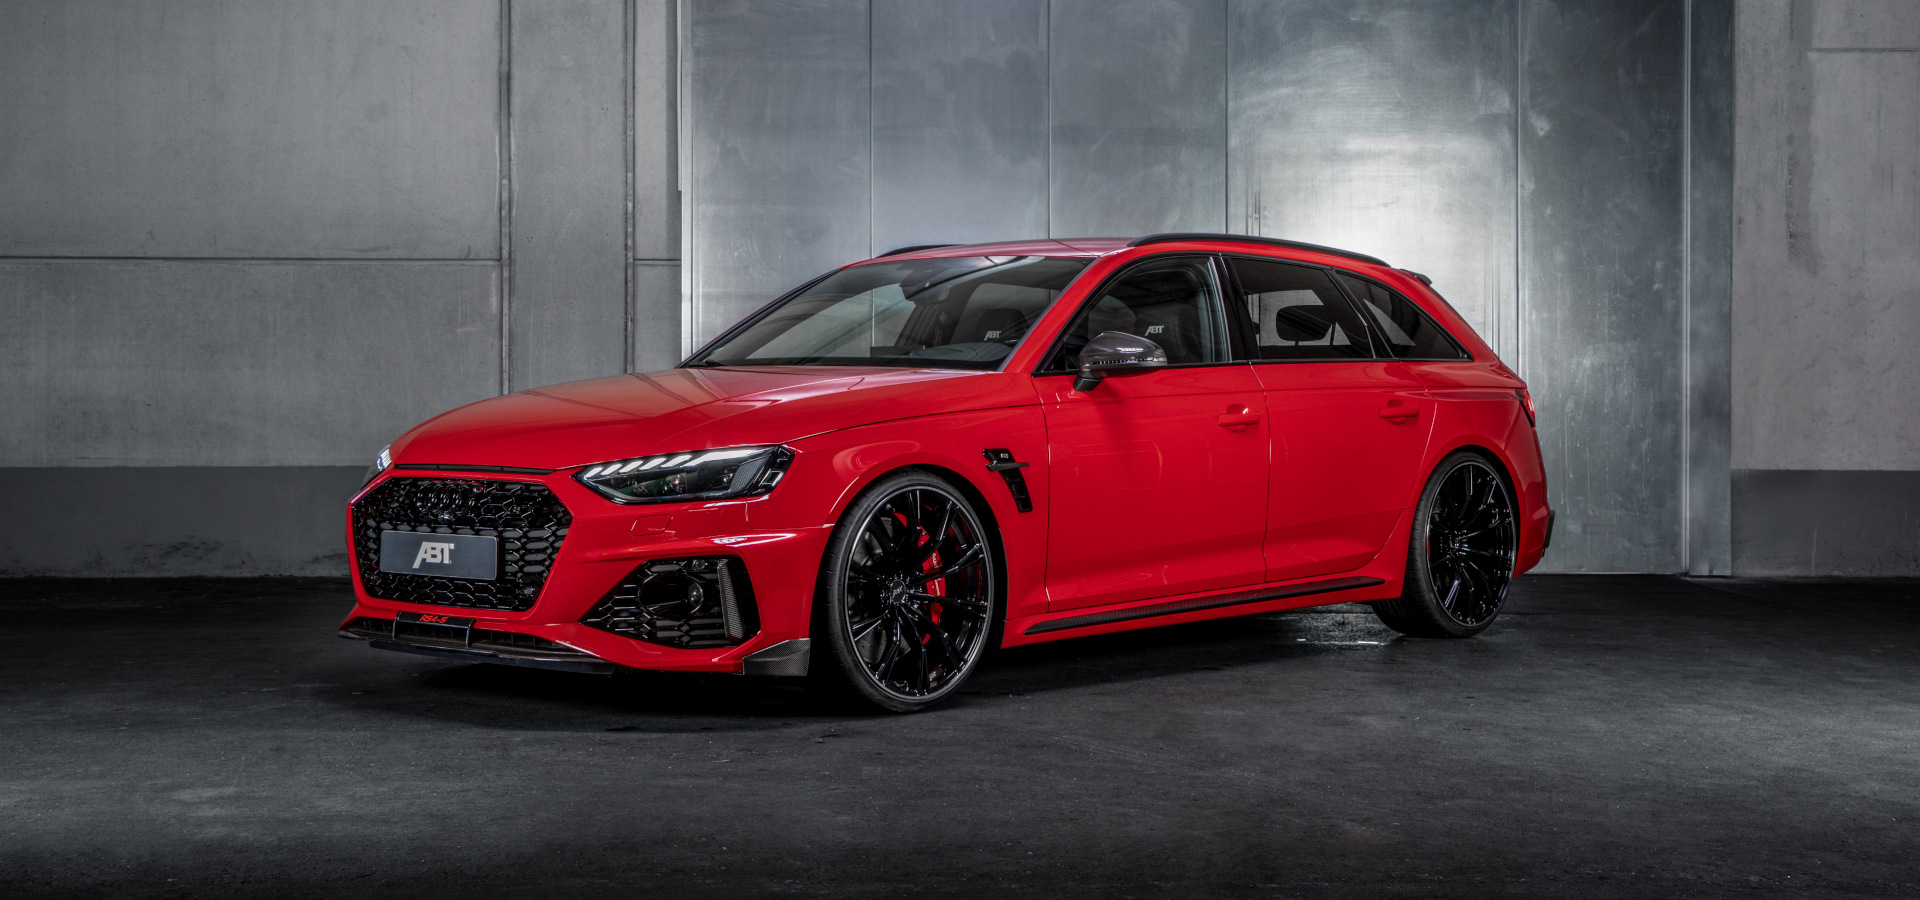 ABT Special Editions - Audi Tuning, VW Tuning, Chiptuning von ABT